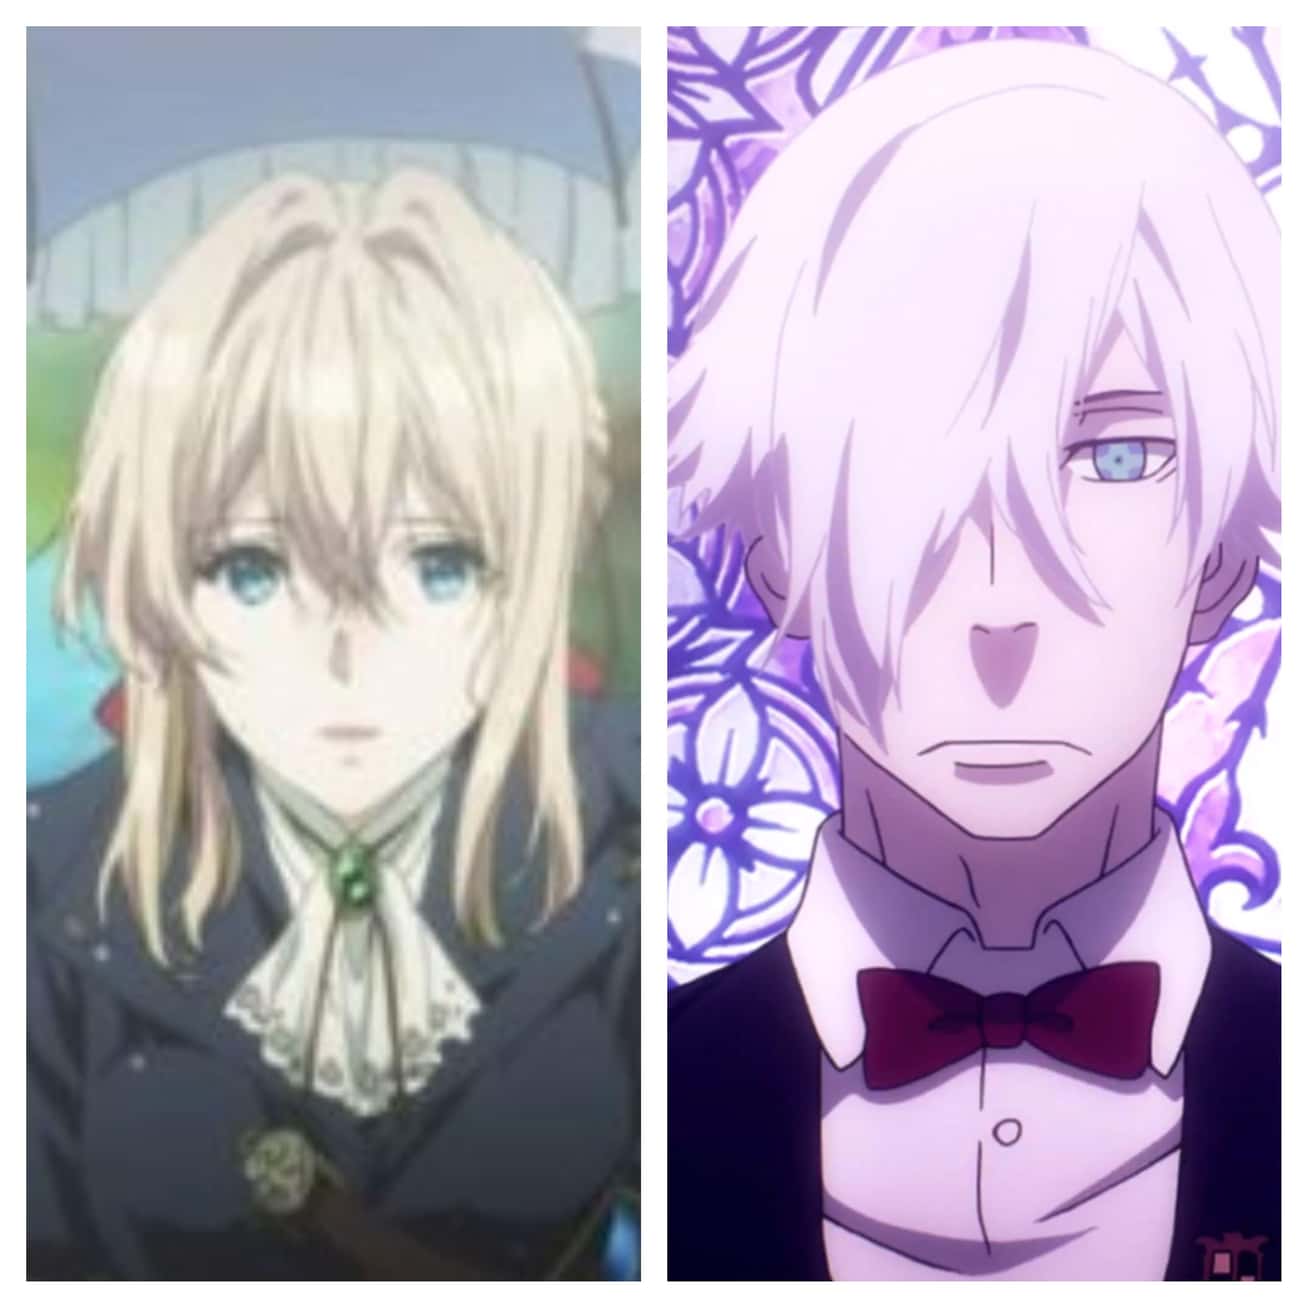 Violet Evergarden From &#39;Violet Evergarden&#39; and Decim From &#39;Death Parade&#39;